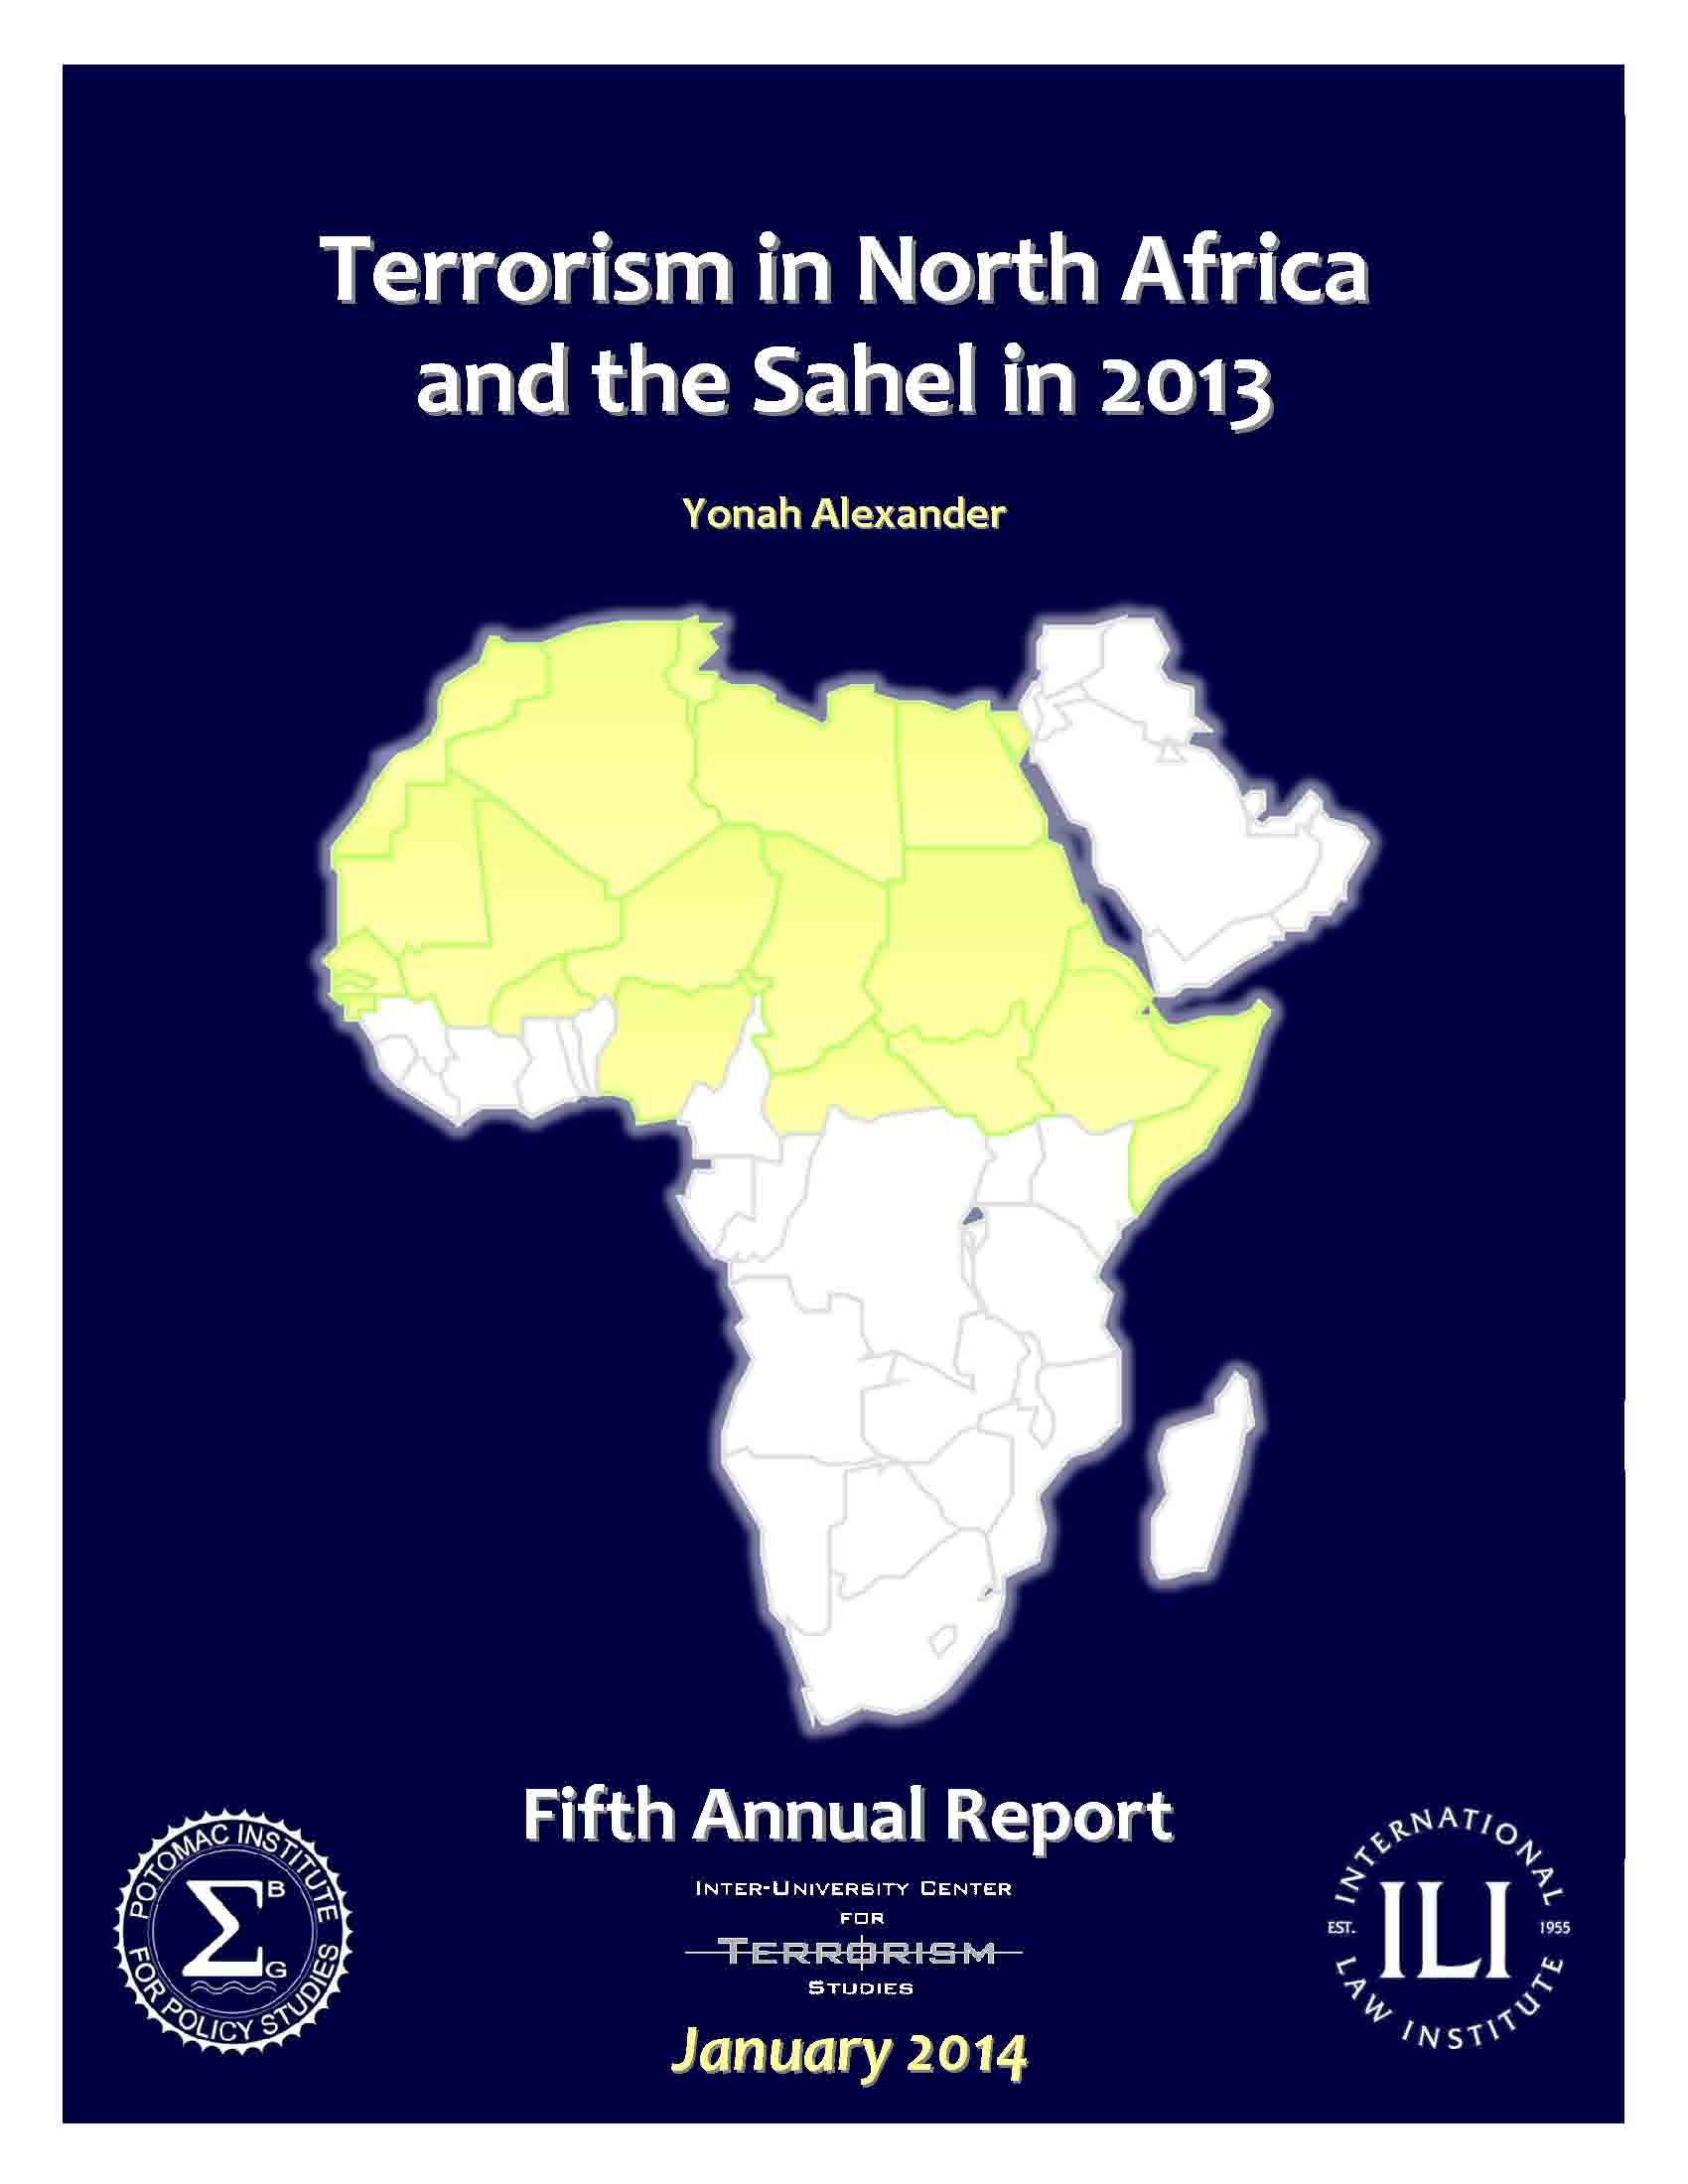 Terrorism in North Africa and The Sahel in 2013